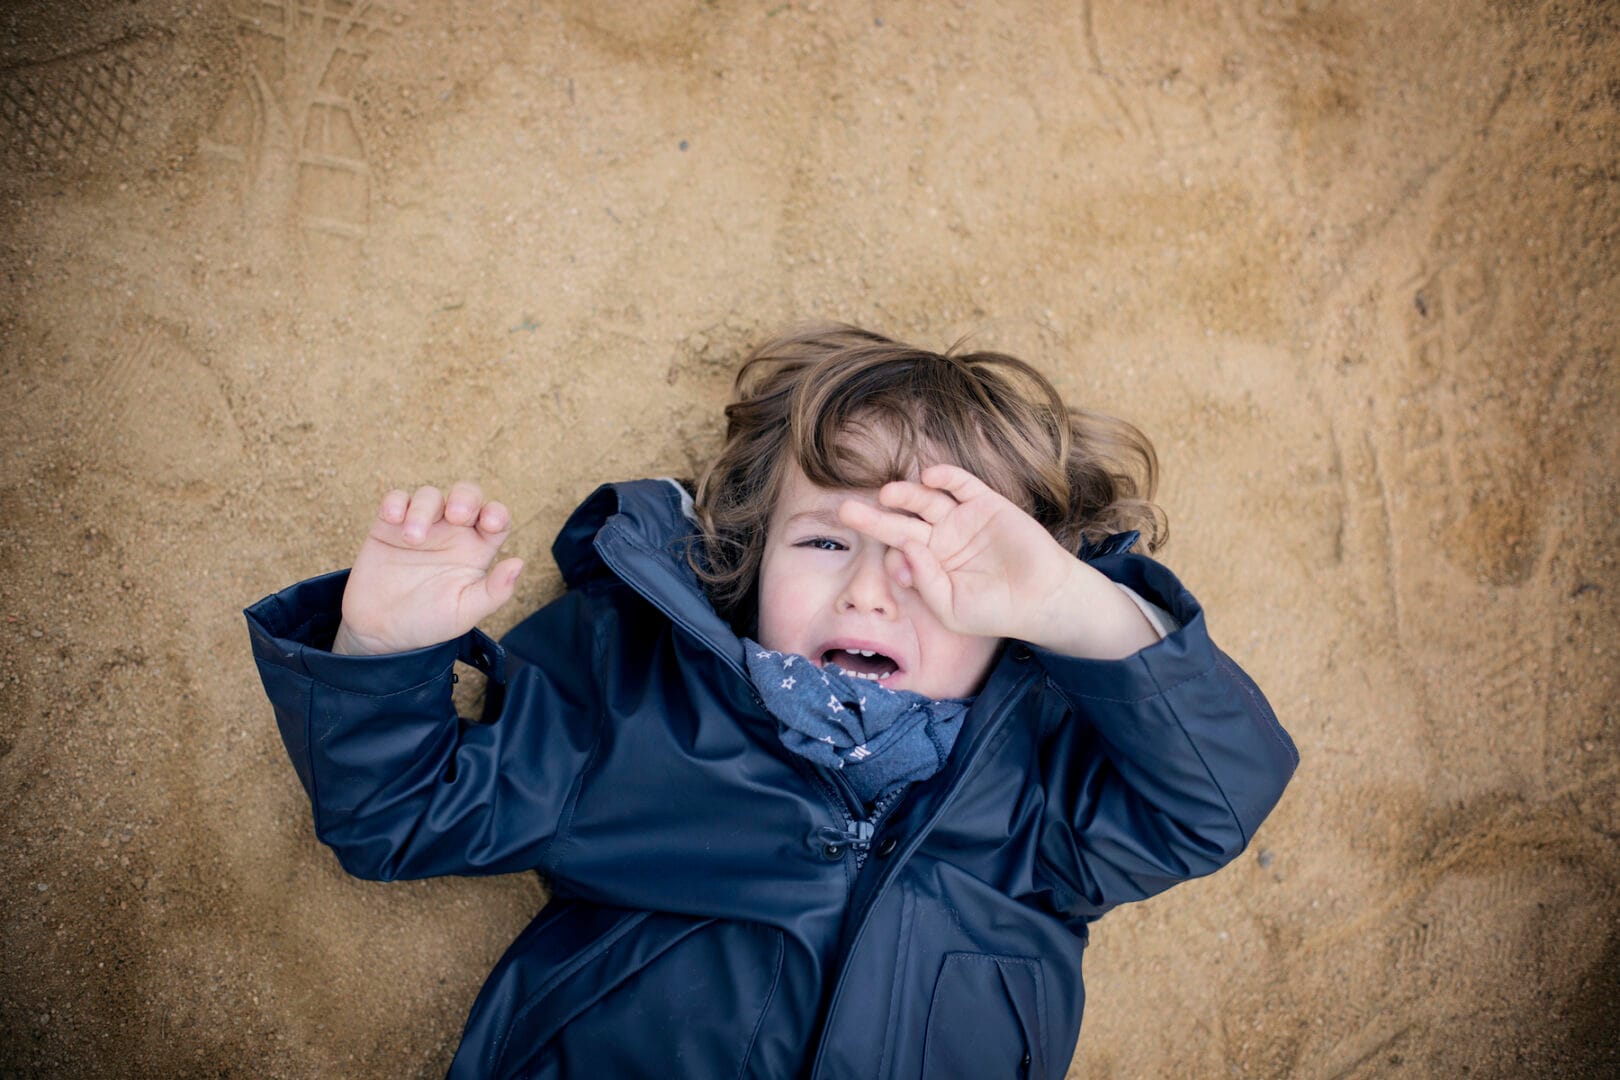 How to get kids to leave when they’re having fun (without a meltdown)